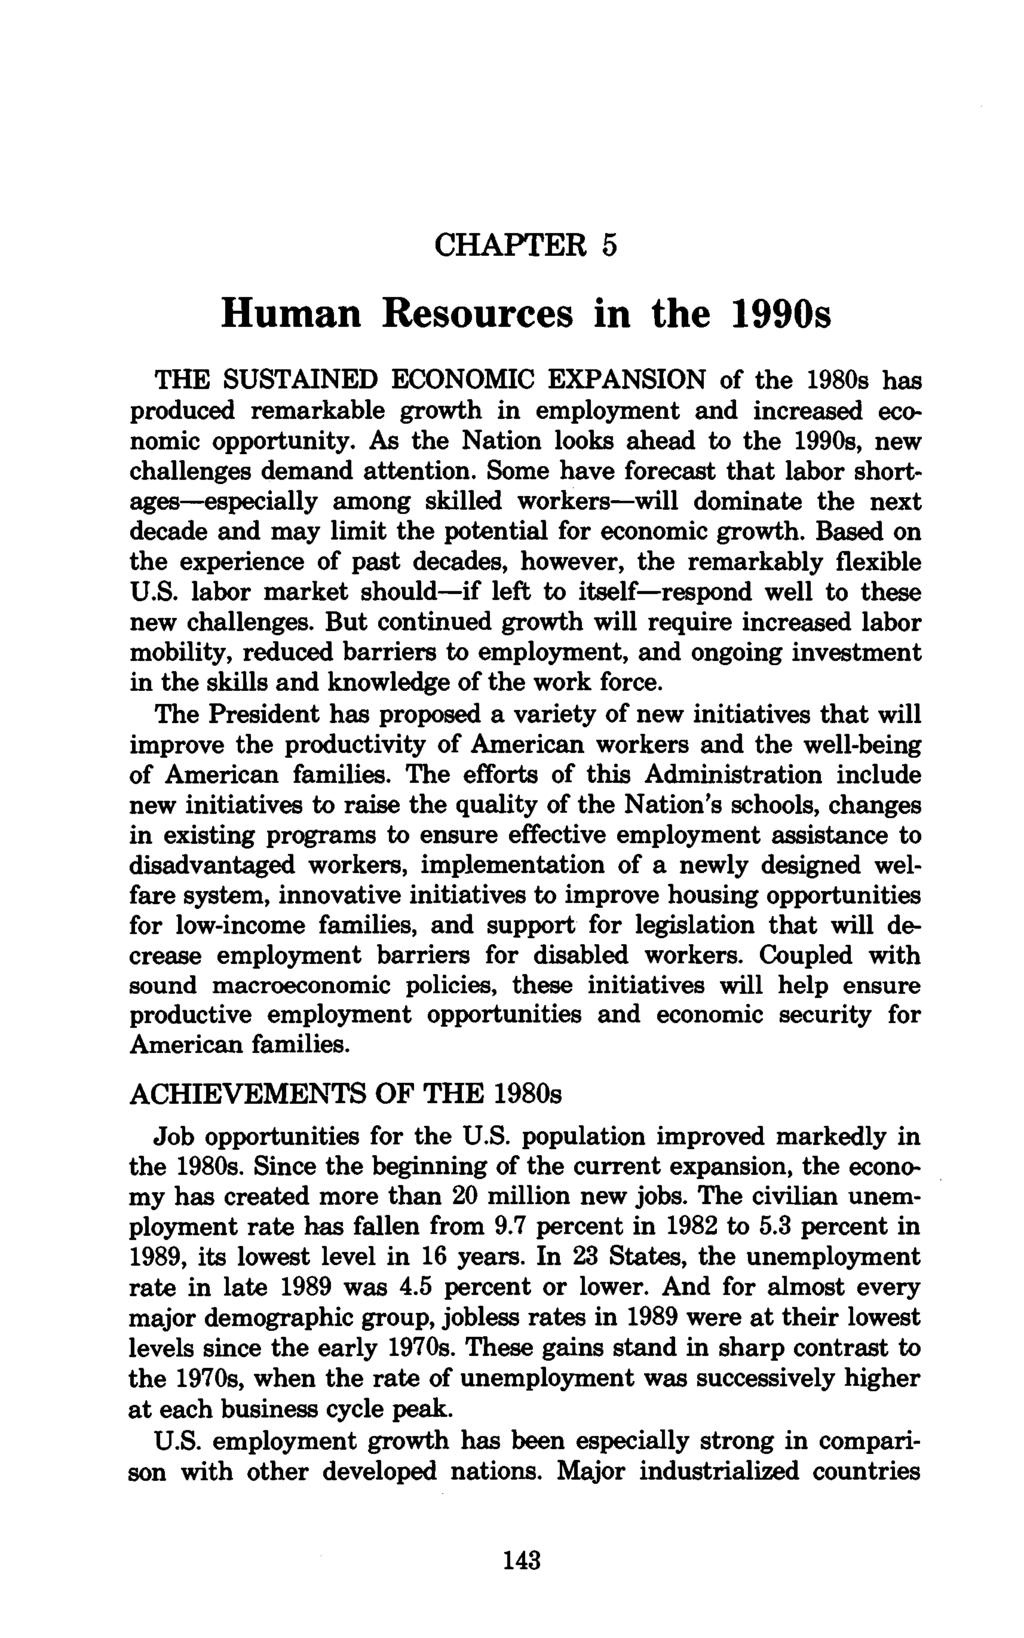 CHAPTER 5 Human Resources in the 1990s THE SUSTAINED ECONOMIC EXPANSION of the 1980s has produced remarkable growth in employment and increased economic opportunity.